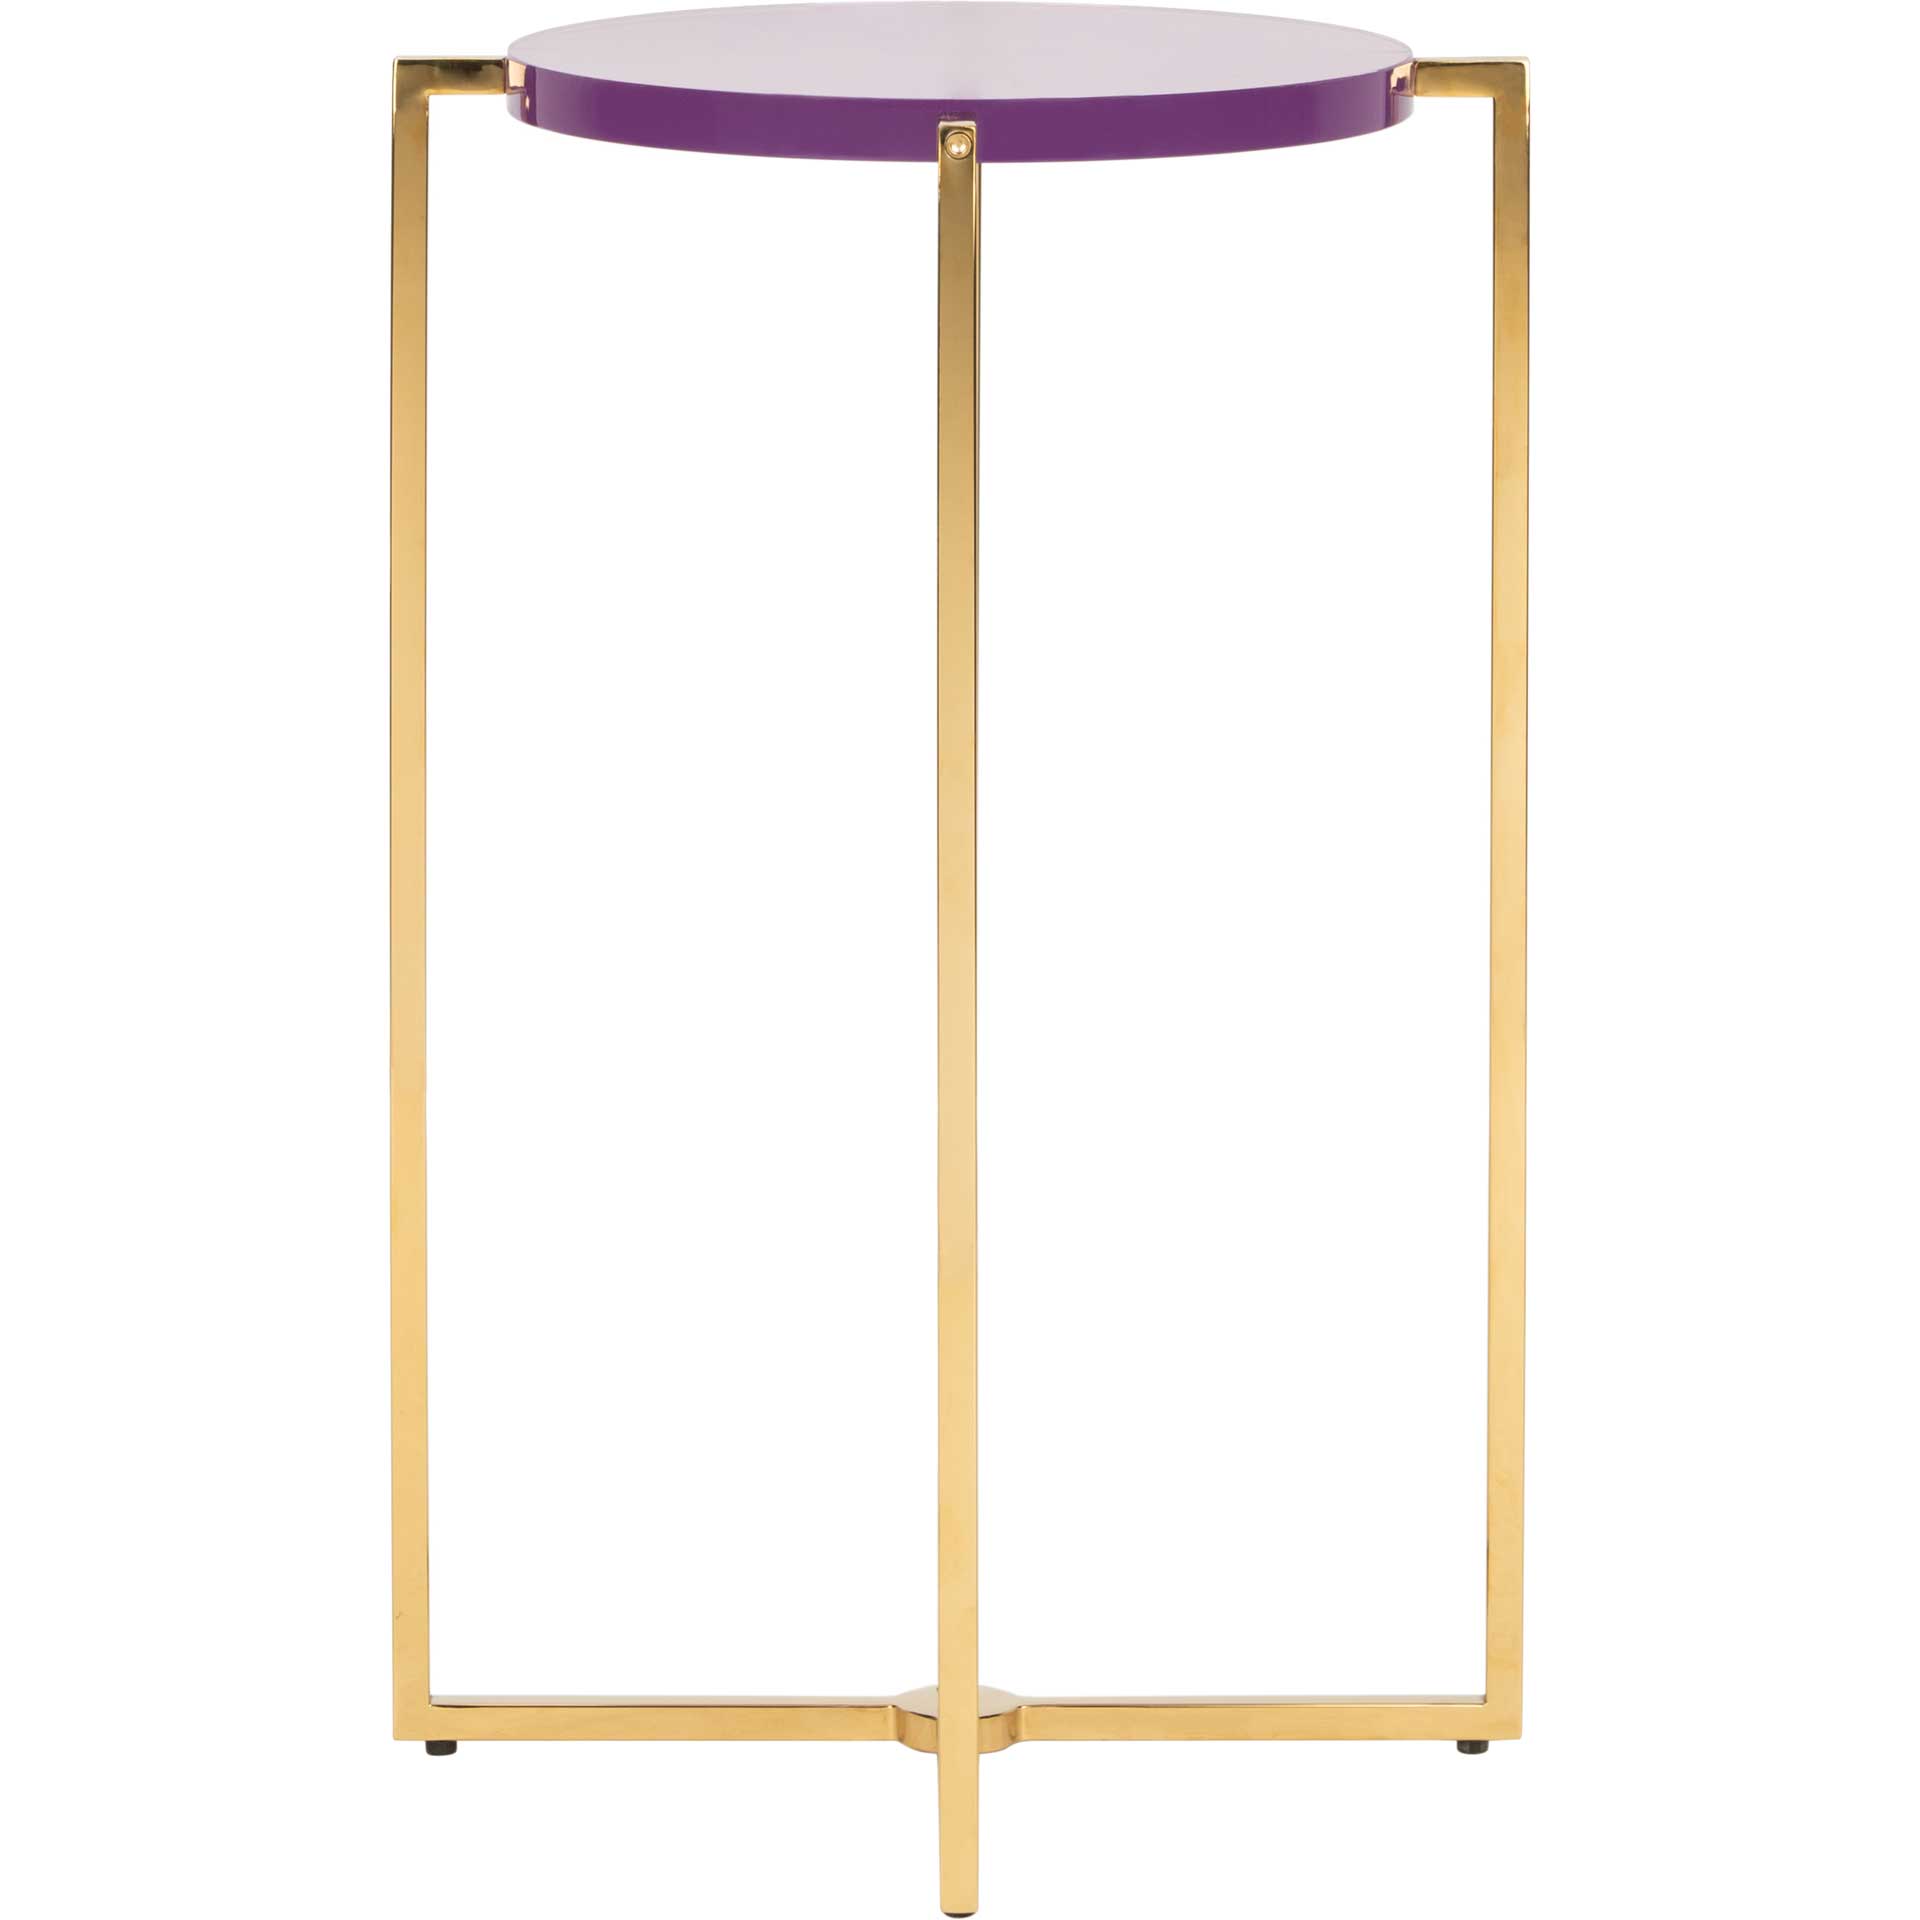 Placido Tall Round Acrylic End Table Amethyst/Gold